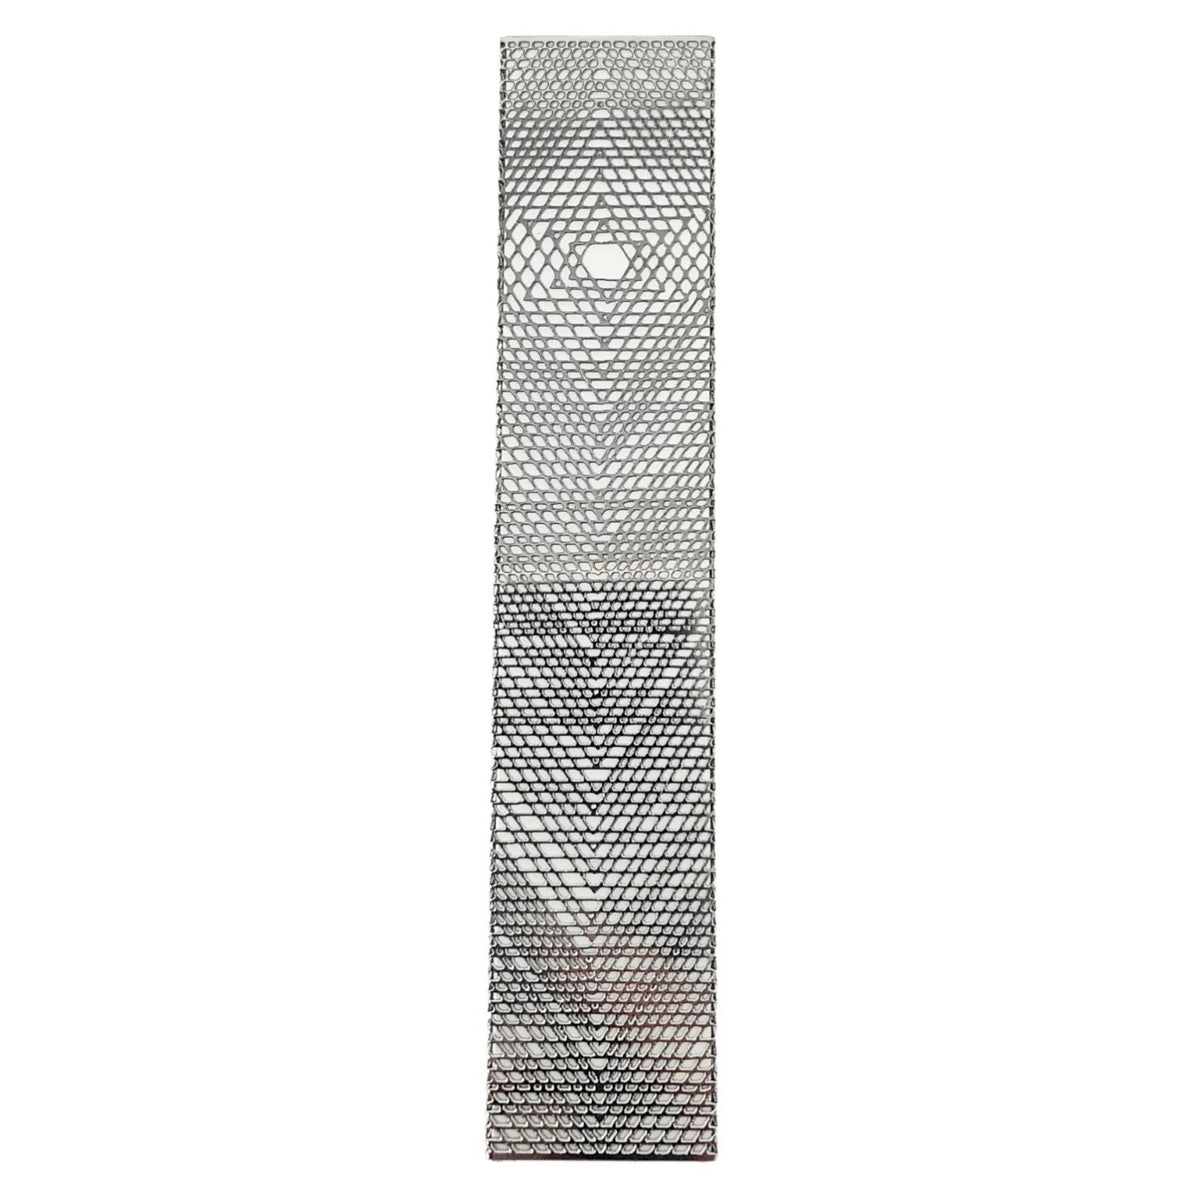 Star of David Mezuzah in silver and white mesh.